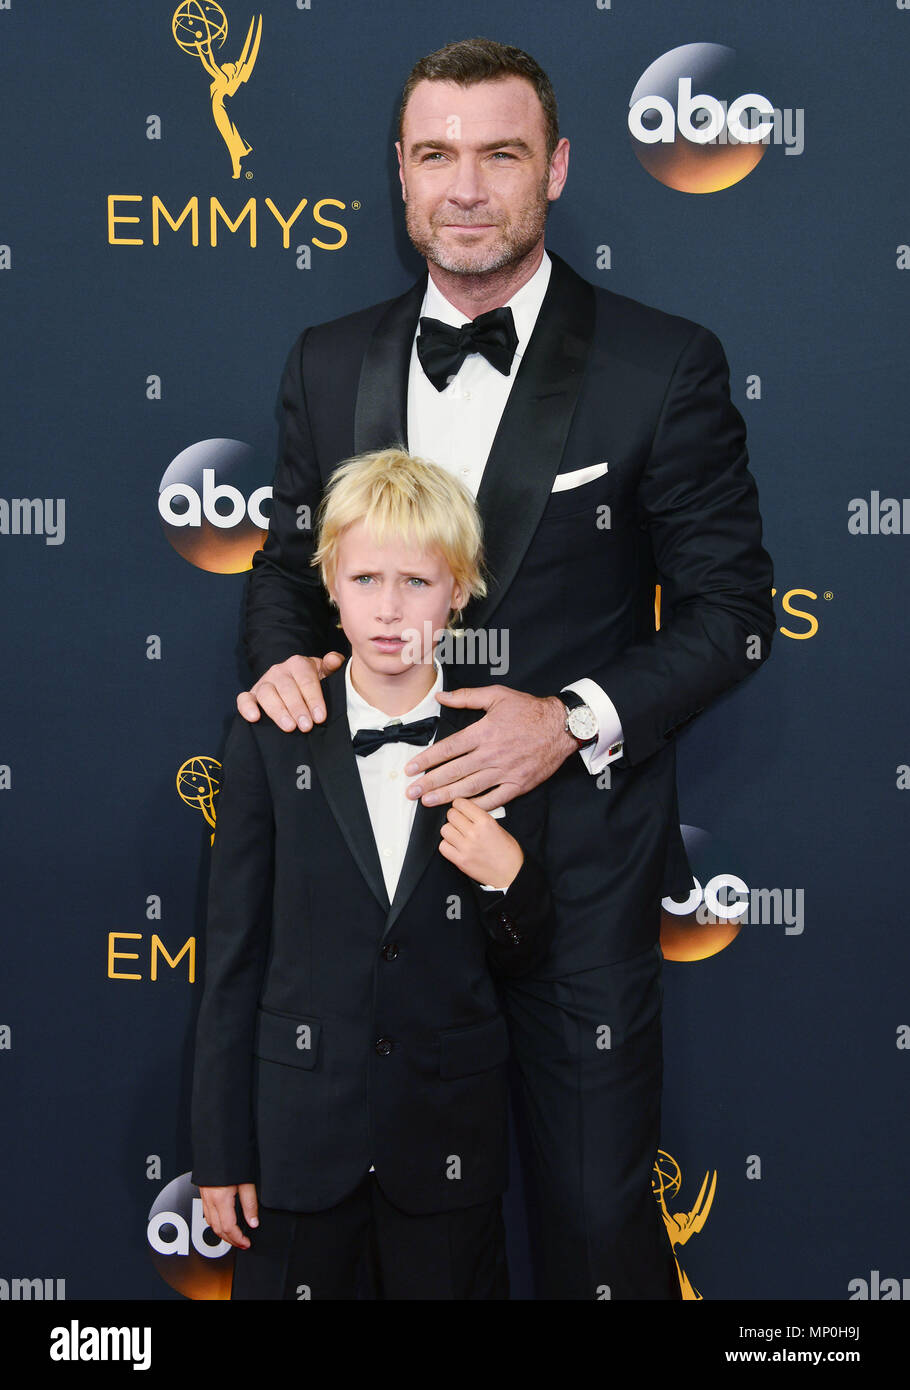 Liev Schreiber, Alexander Schreiber 072 at the 68th Emmy Awards 2016 at the Microsoft Theatre in Los Angeles. September 18, 2016.Liev Schreiber, Alexander Schreiber 072 ------------- Red Carpet Event, Vertical, USA, Film Industry, Celebrities,  Photography, Bestof, Arts Culture and Entertainment, Topix Celebrities fashion /  Vertical, Best of, Event in Hollywood Life - California,  Red Carpet and backstage, USA, Film Industry, Celebrities,  movie celebrities, TV celebrities, Music celebrities, Photography, Bestof, Arts Culture and Entertainment,  Topix, vertical,  family from from the year , 2 Stock Photo